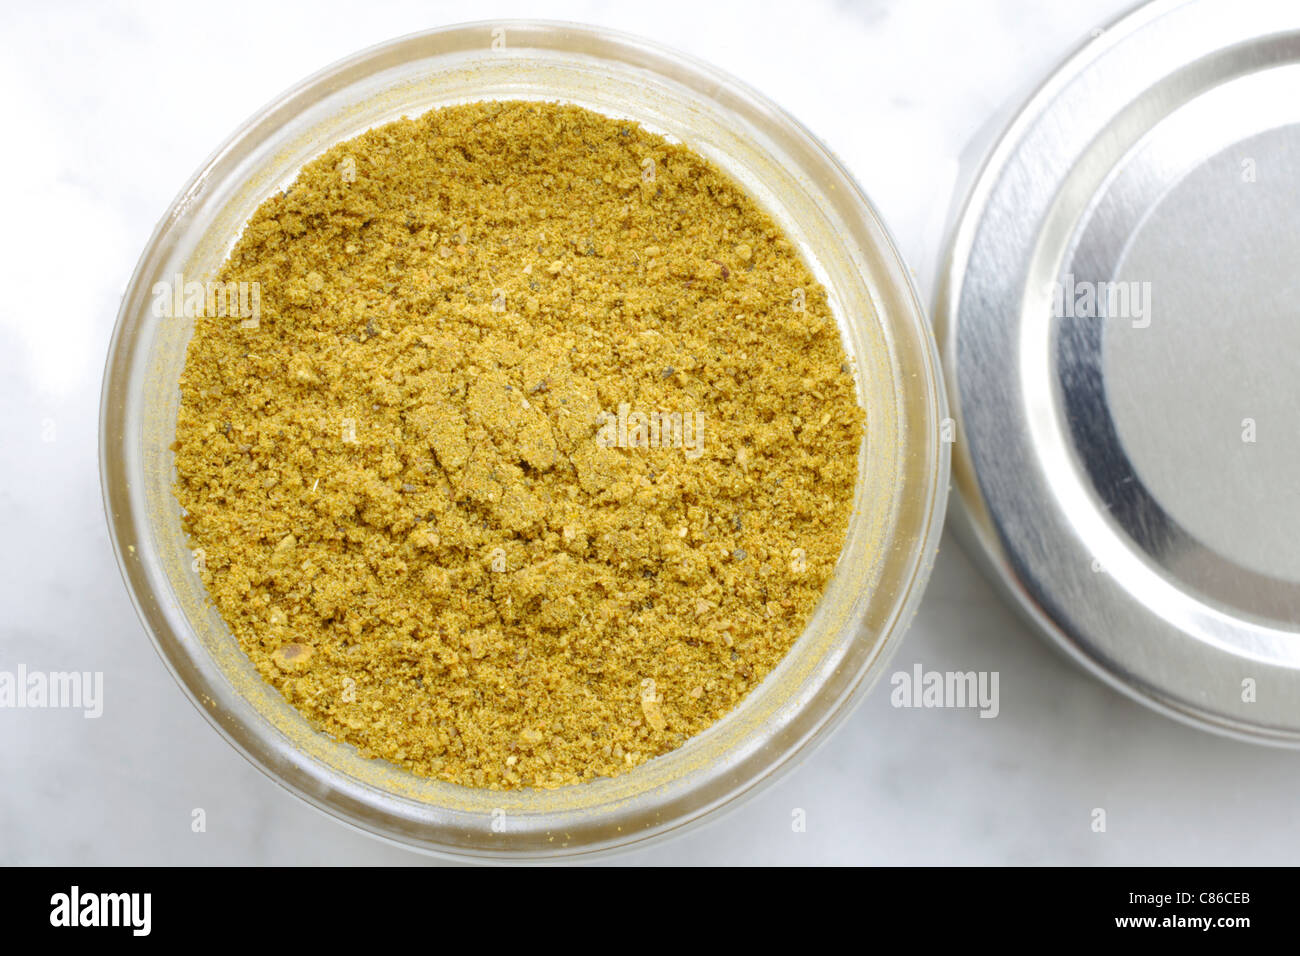 Madras curry spice blend Stock Photo